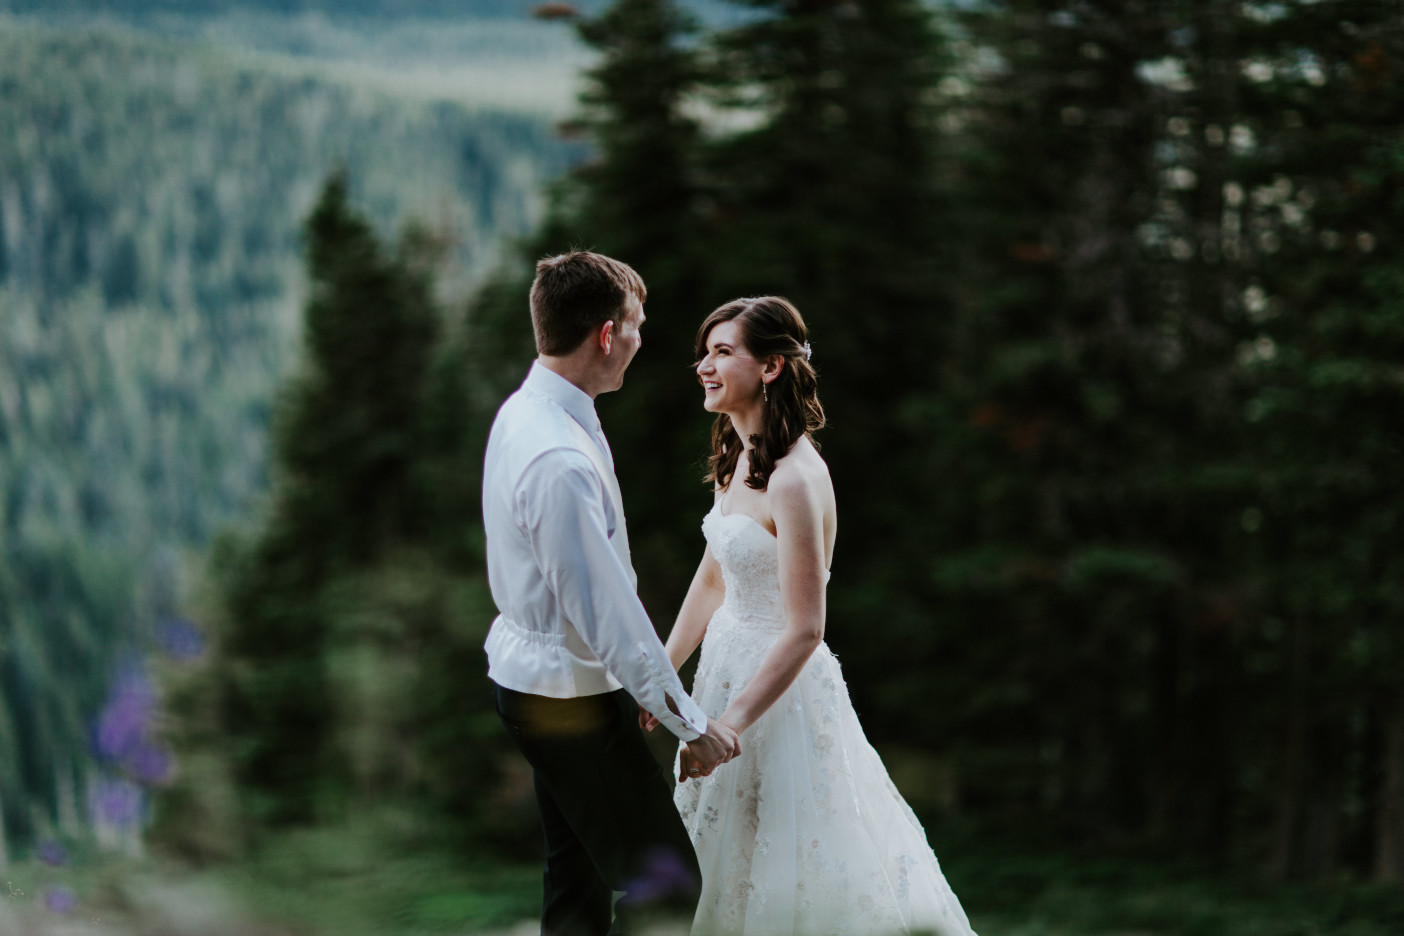 Moira and Ryan smile at eachother near the view at Mount Hood. Adventure elopement wedding shoot by Sienna Plus Josh.